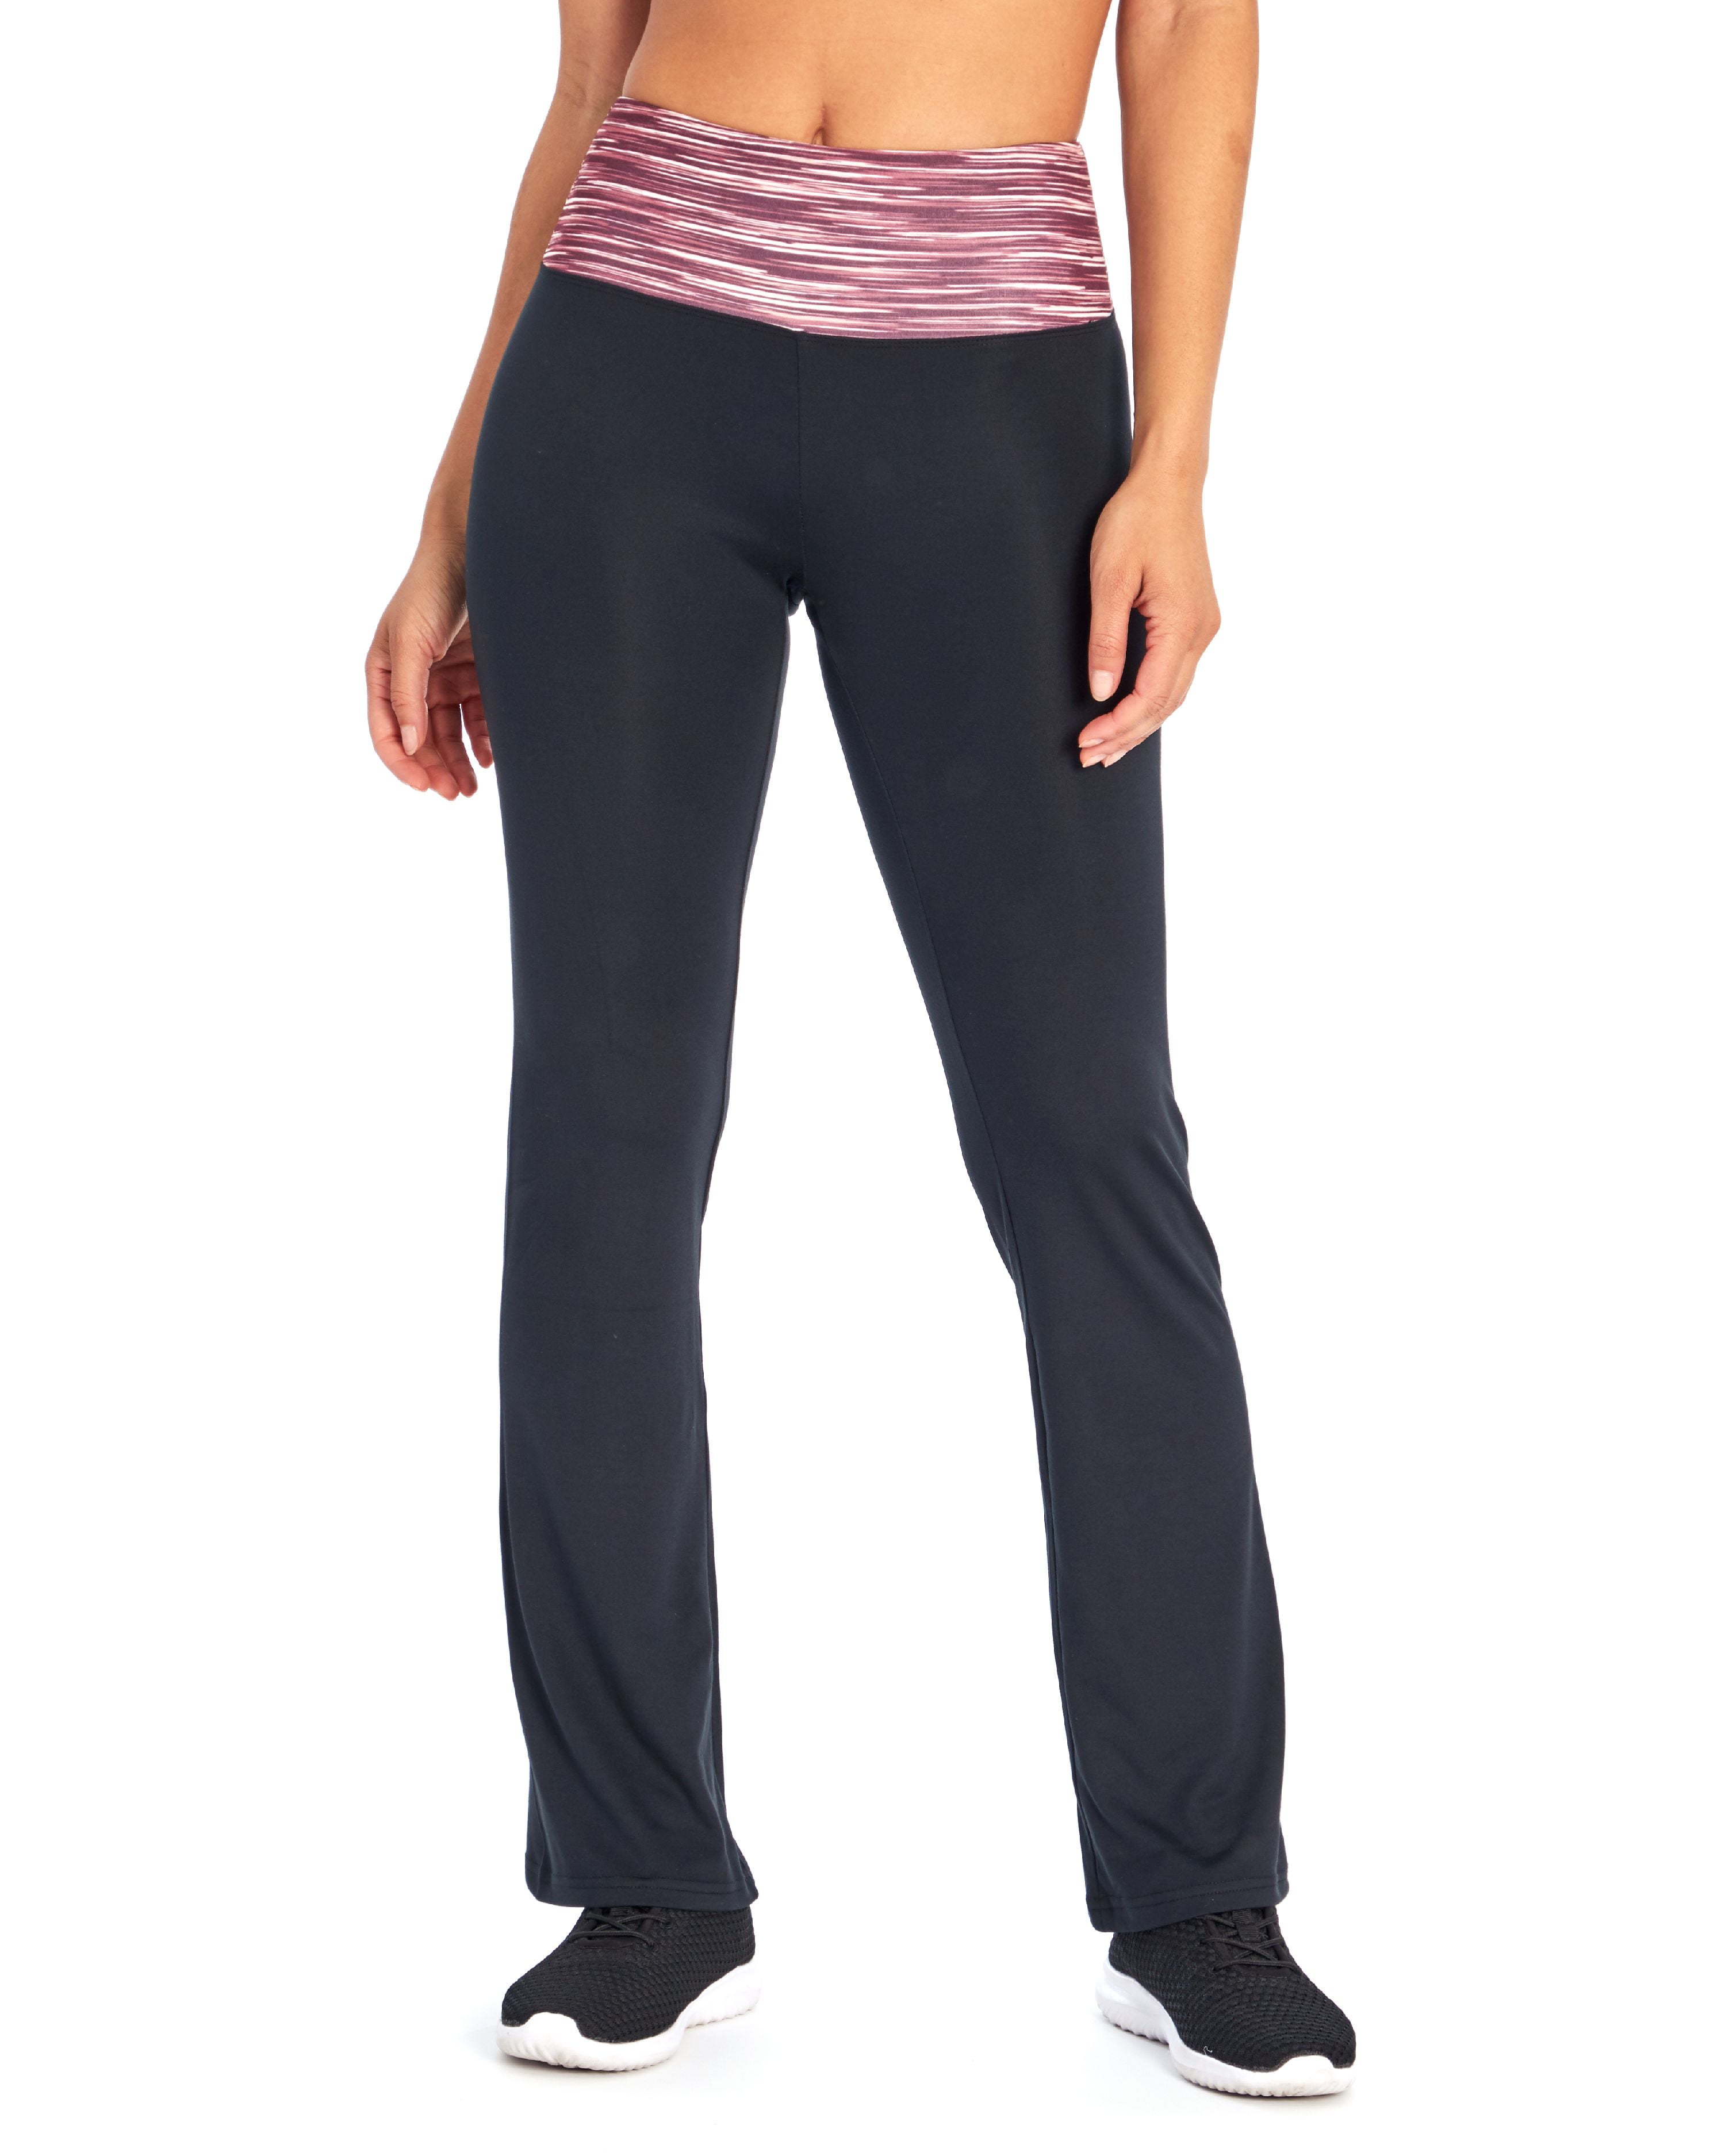 Stylish Bally Total Fitness Women's Active Pants